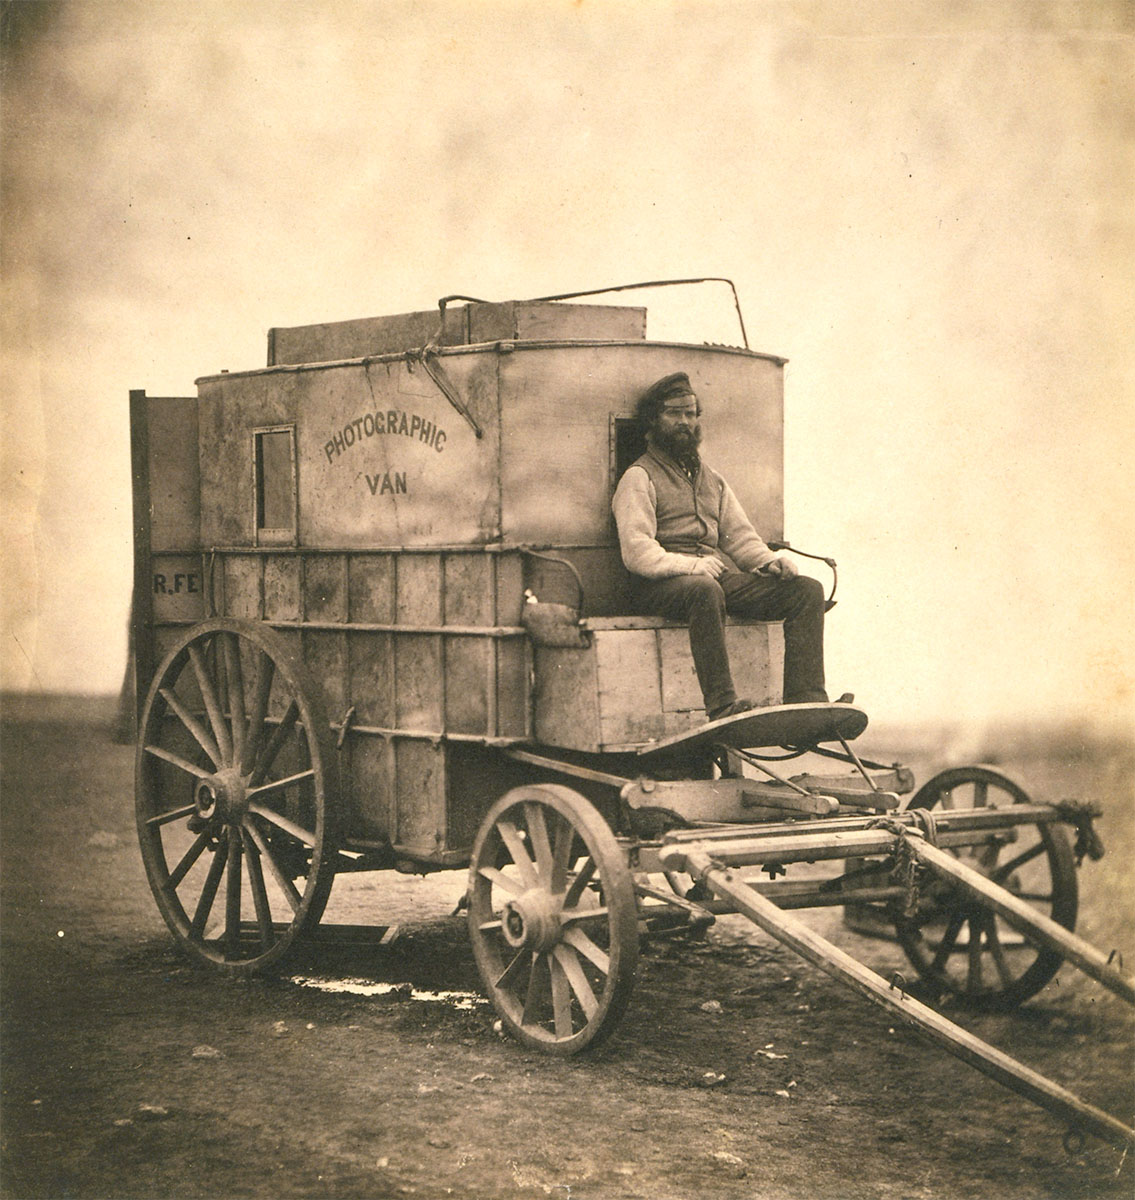 The artist’s van. Marcus Sparling, full-length portrait, seated on Roger Fenton’s photographic van, 1855 - Library of Congress<p>© Roger Fenton</p>